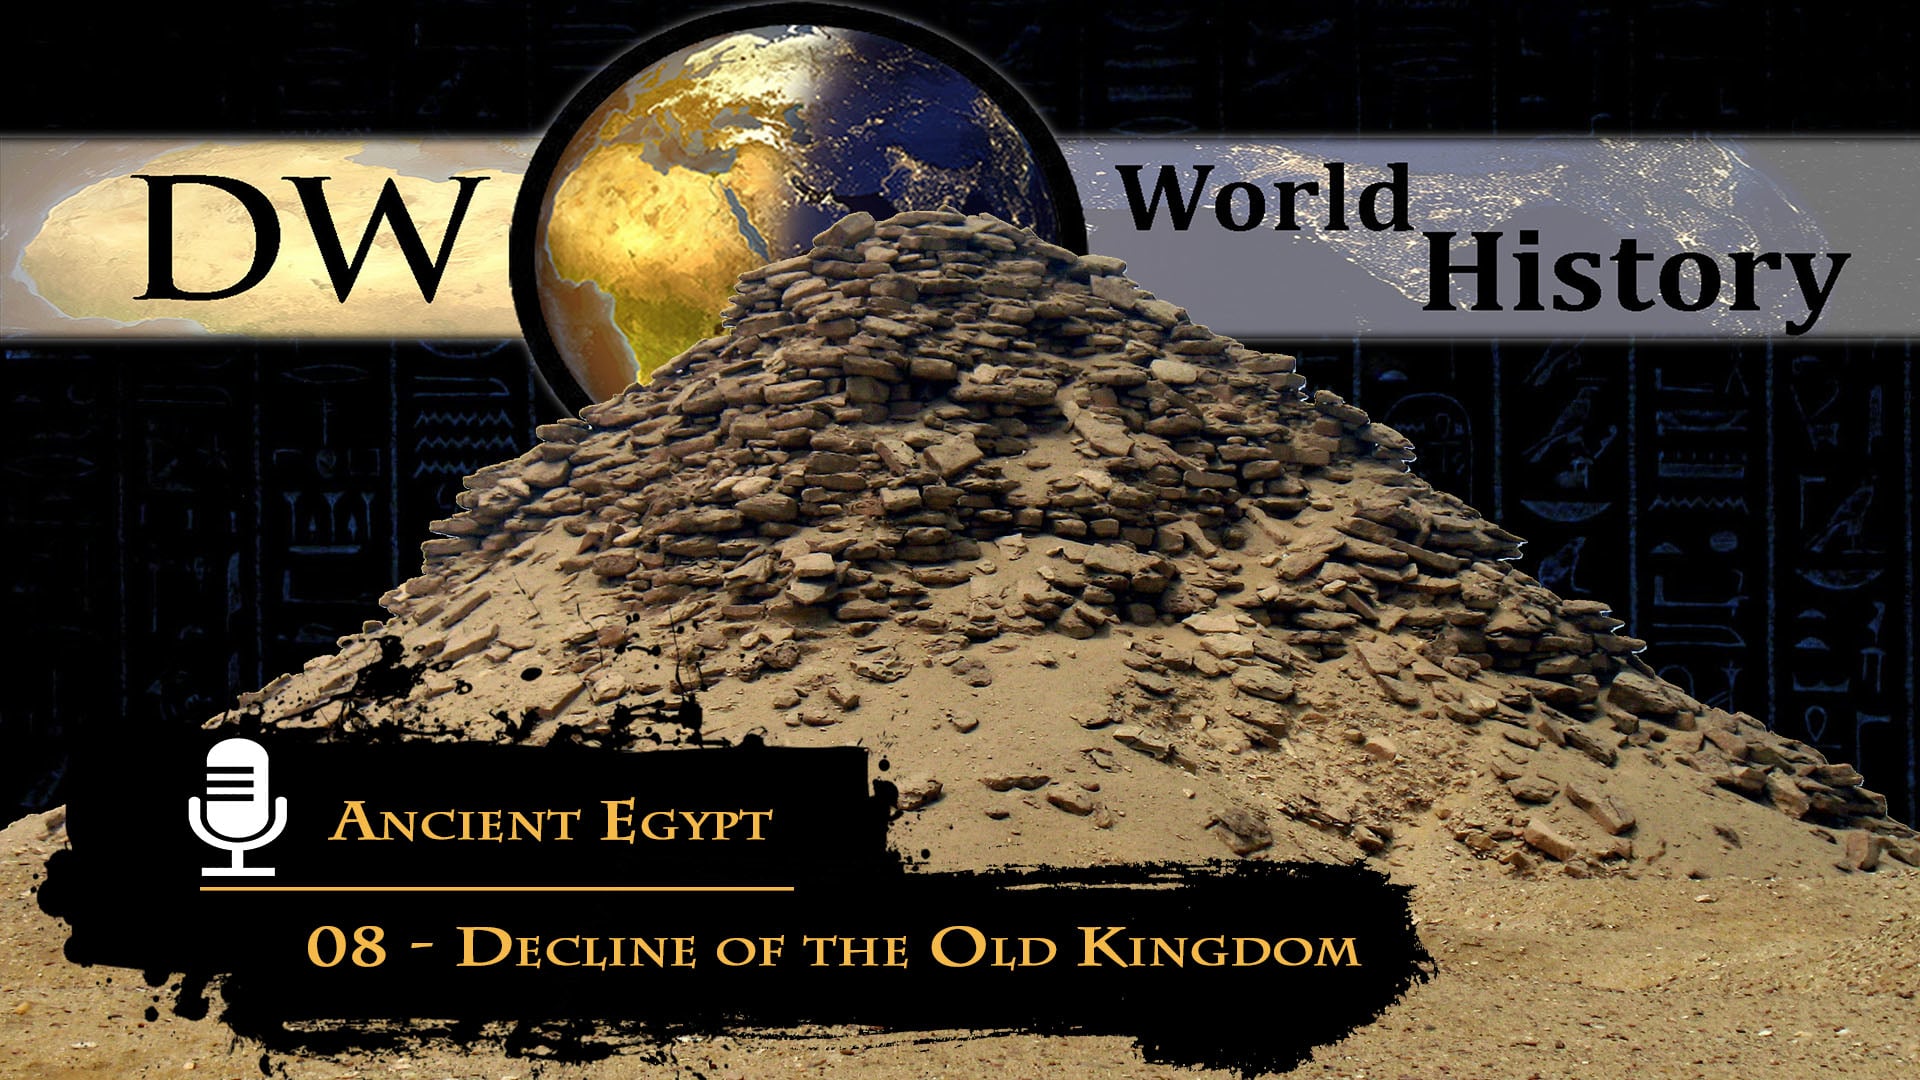 Ancient Egypt - 08 - Decline of the Old Kingdom